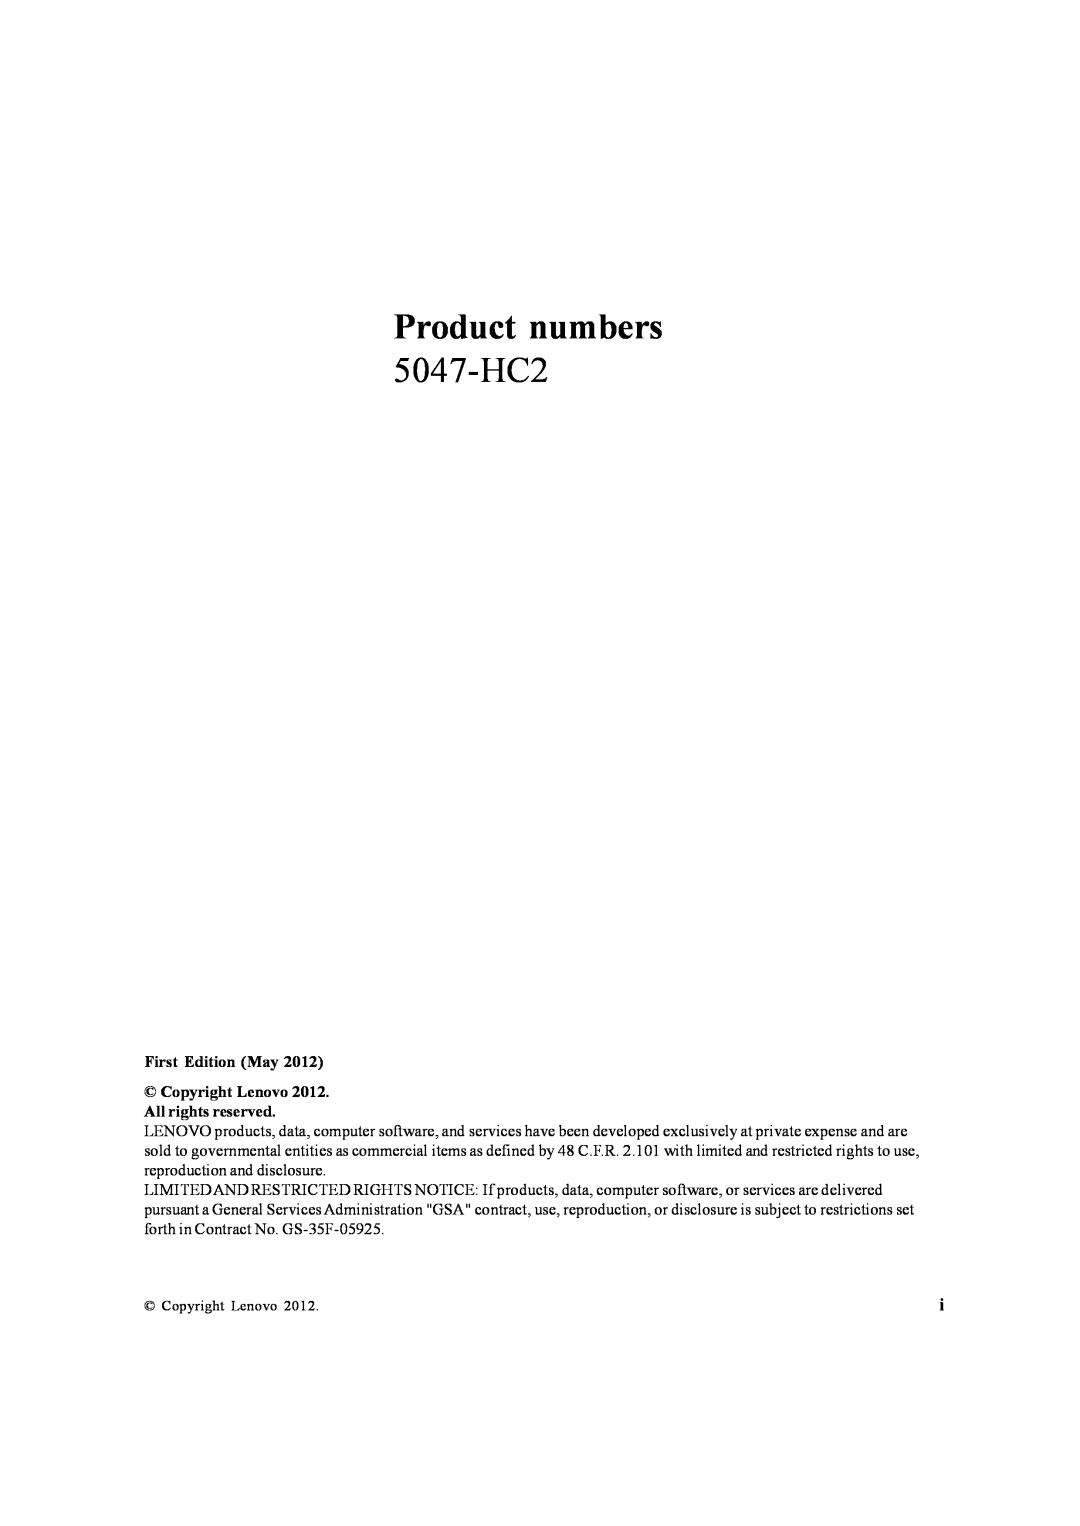 Lenovo 5047HC2 manual Product numbers, 5047-HC2, First Edition May Copyright Lenovo 2012. All rights reserved 